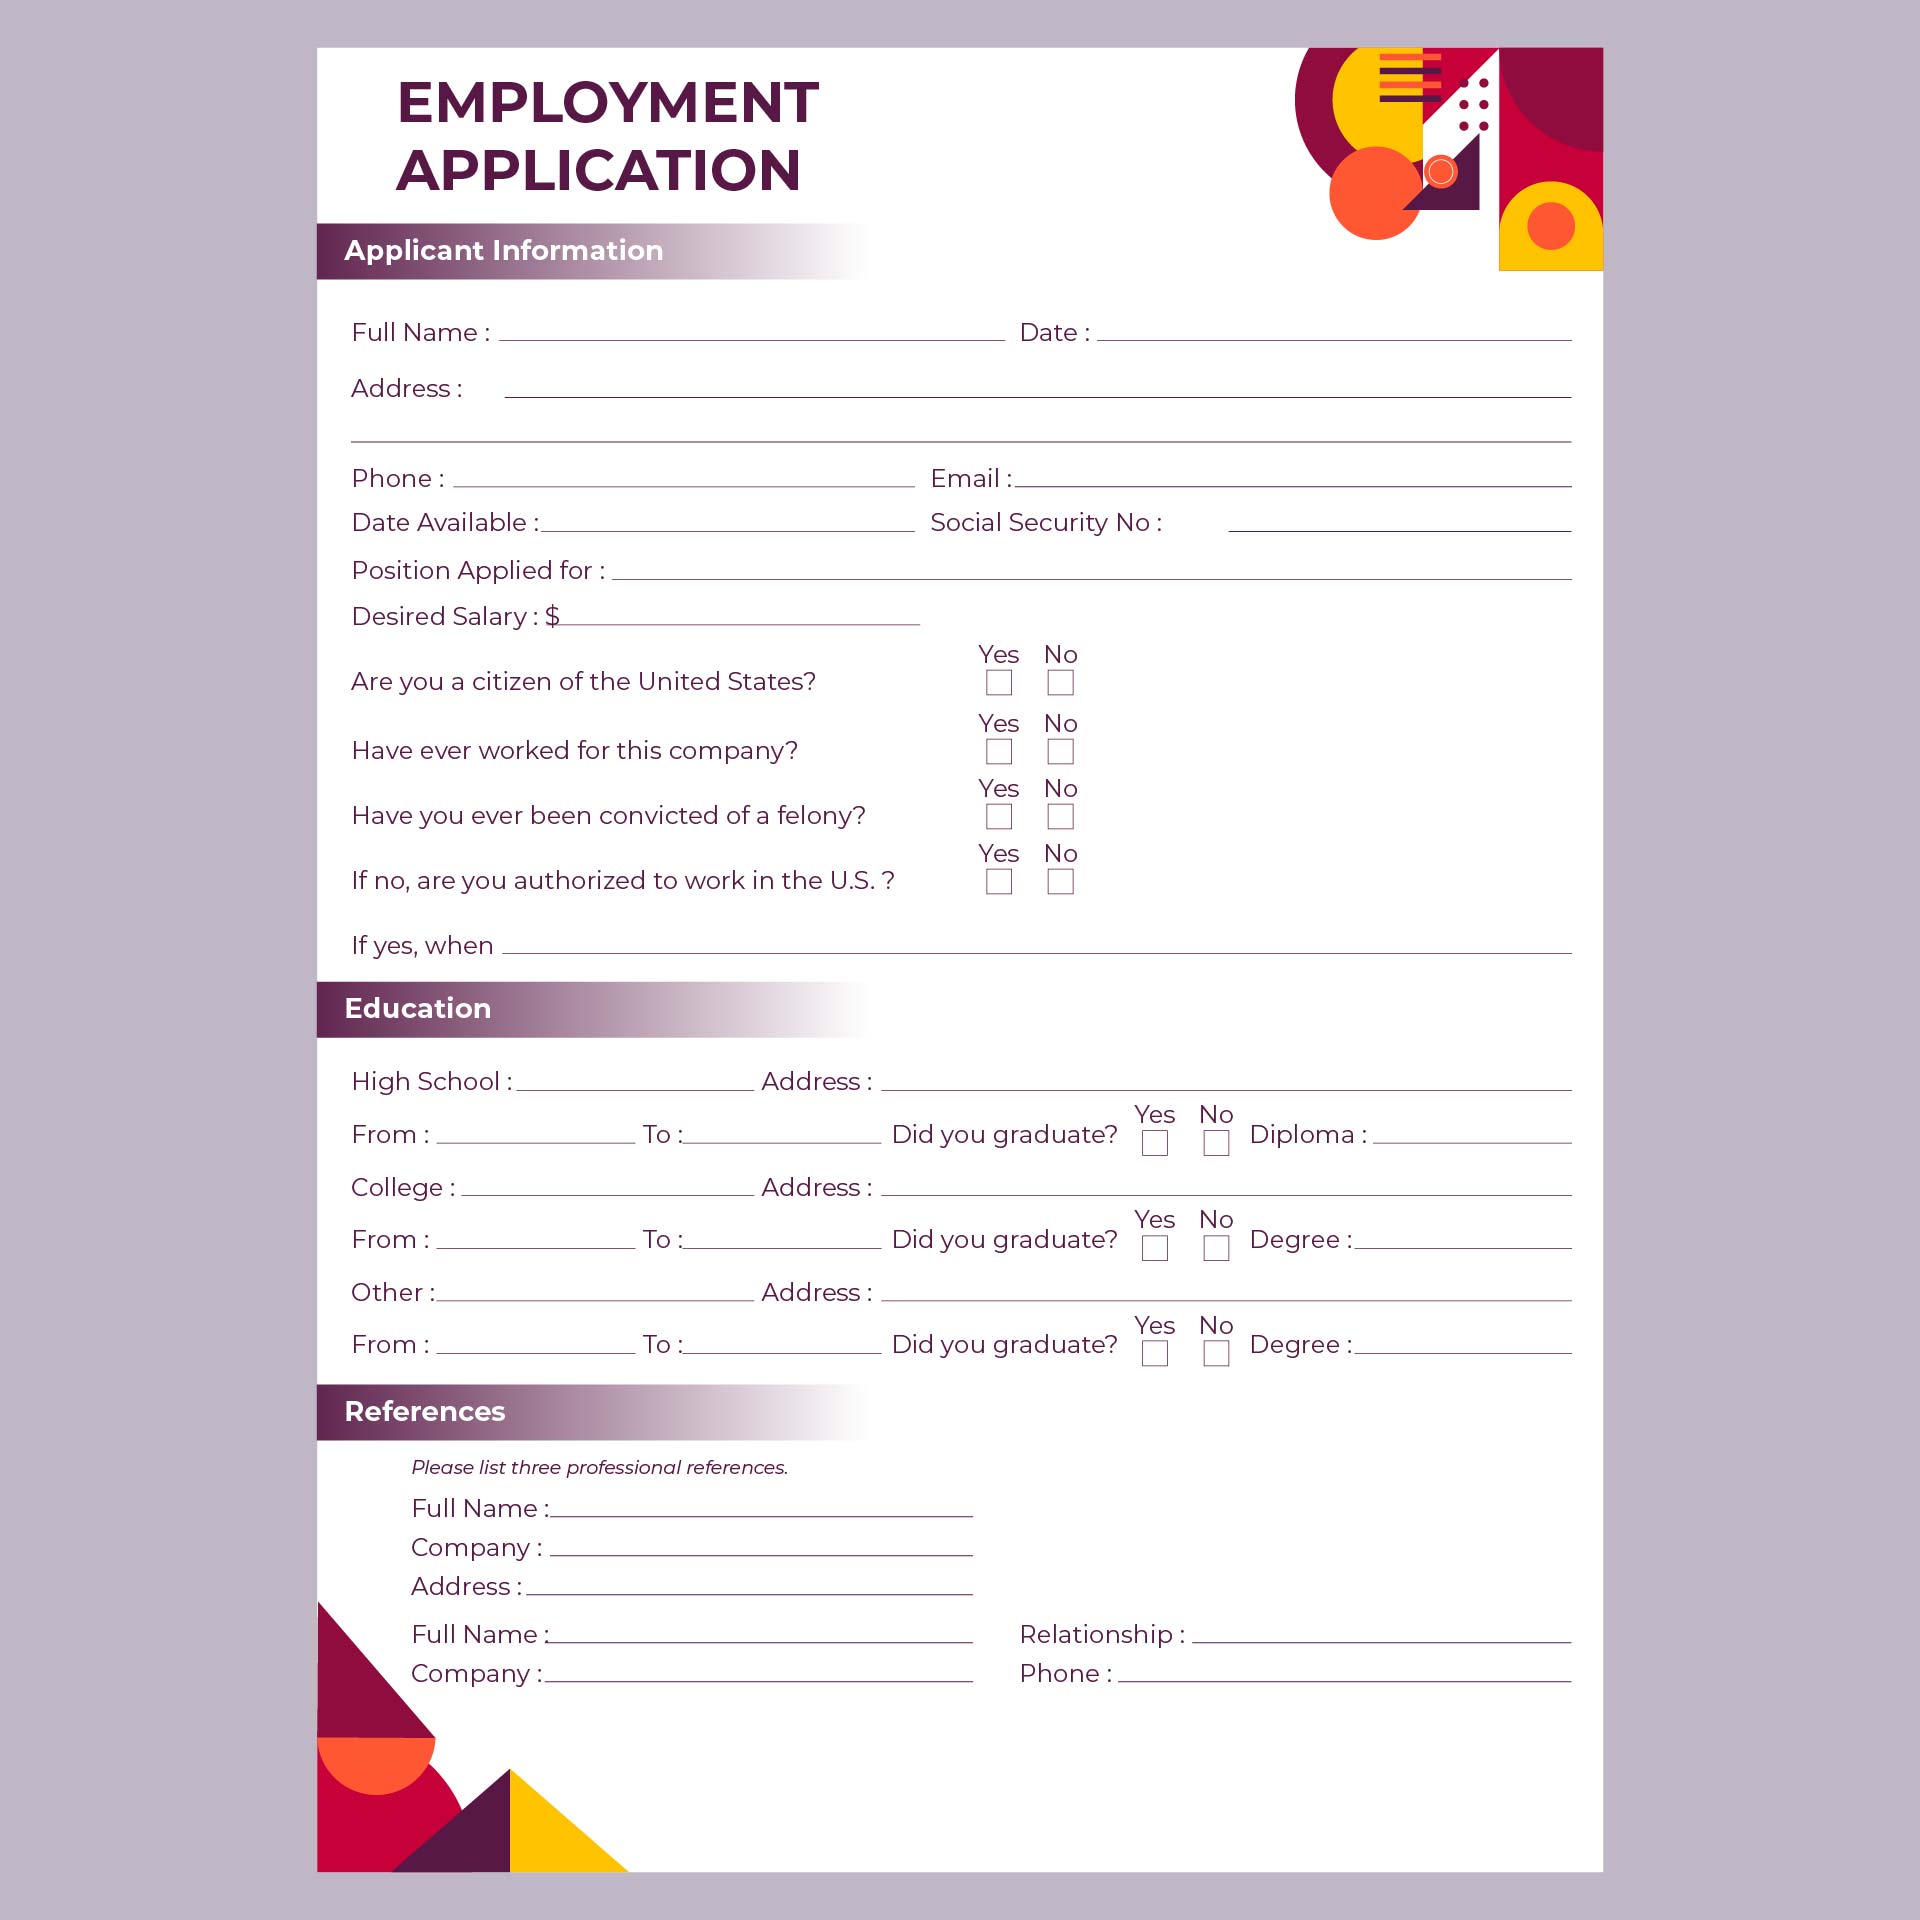 9 Best Images Of Practice Job Application Forms Printable Practice Job Application Form Free